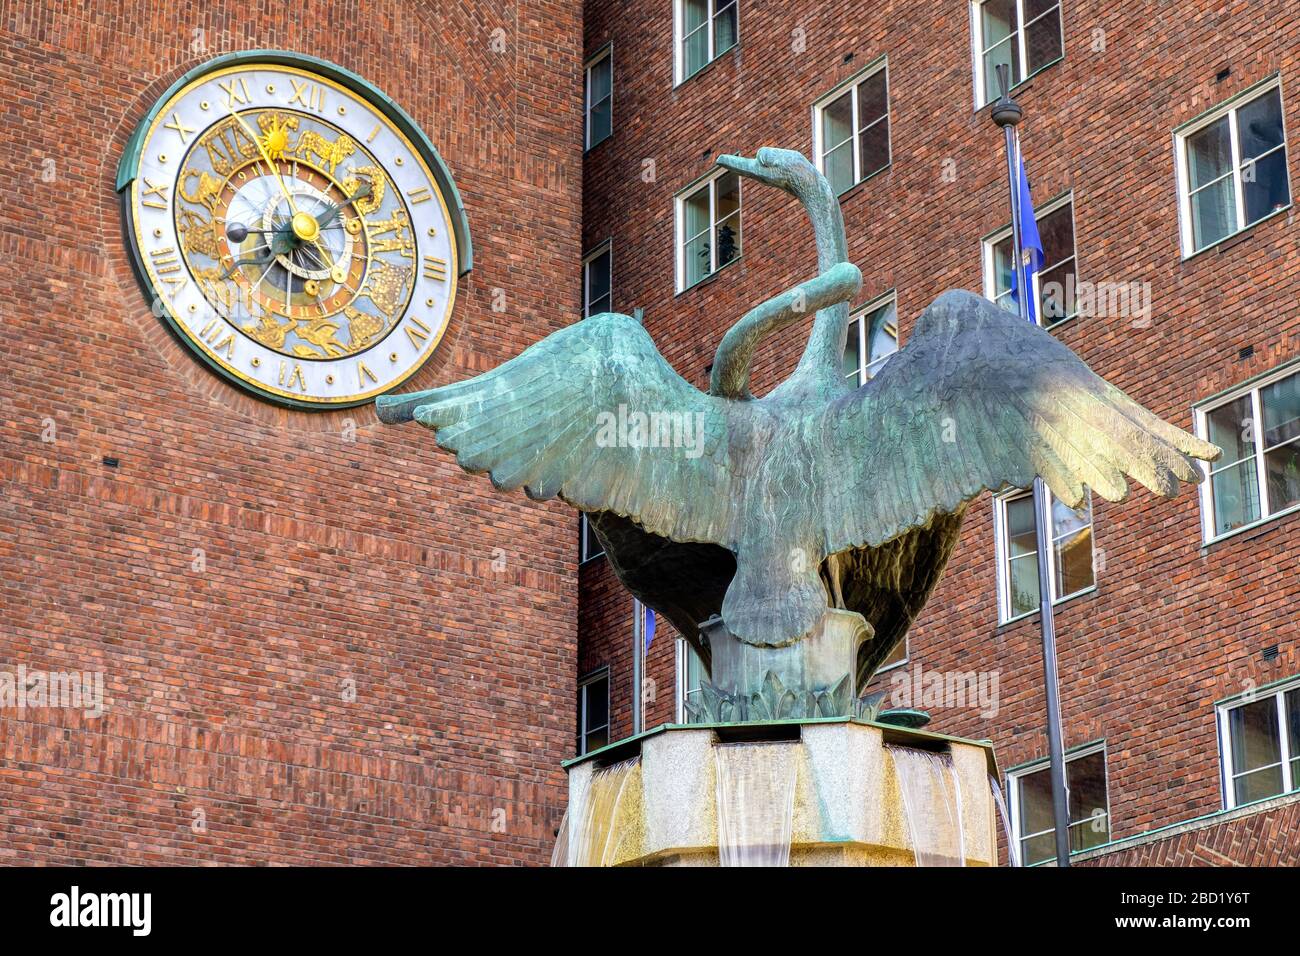 Oslo, Ostlandet / Norway - 2019/08/30: Swan fountain sculpture by Dyre Vaa in front of City Hall historic building - Radhuset - with astronomic clock Stock Photo